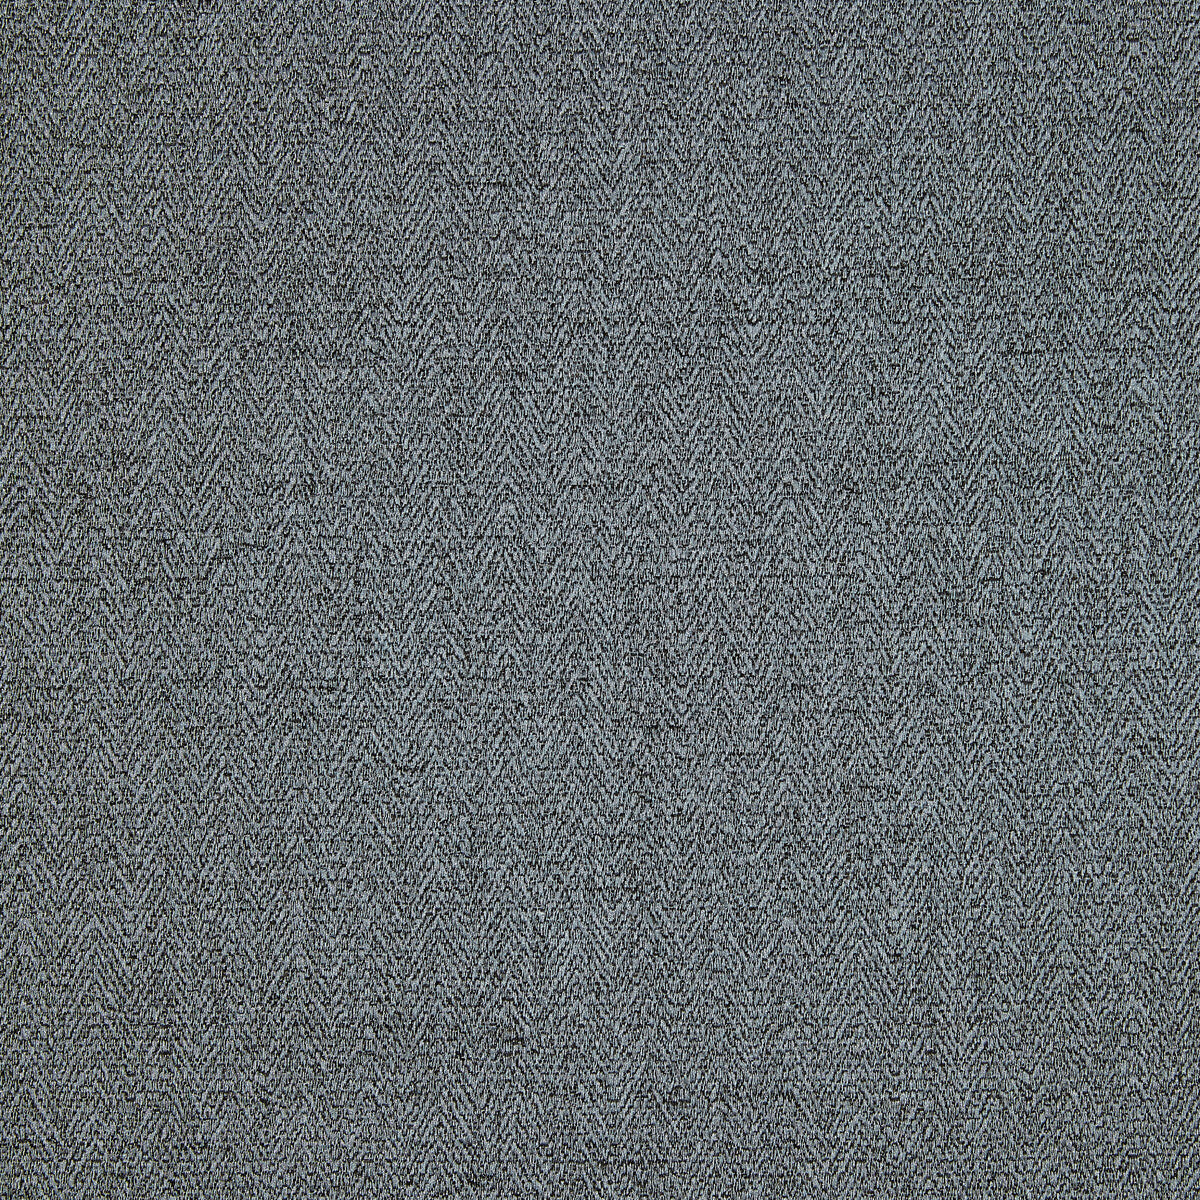 Brummell fabric in 4 color - pattern LZ-30363.04.0 - by Kravet Design in the Lizzo collection